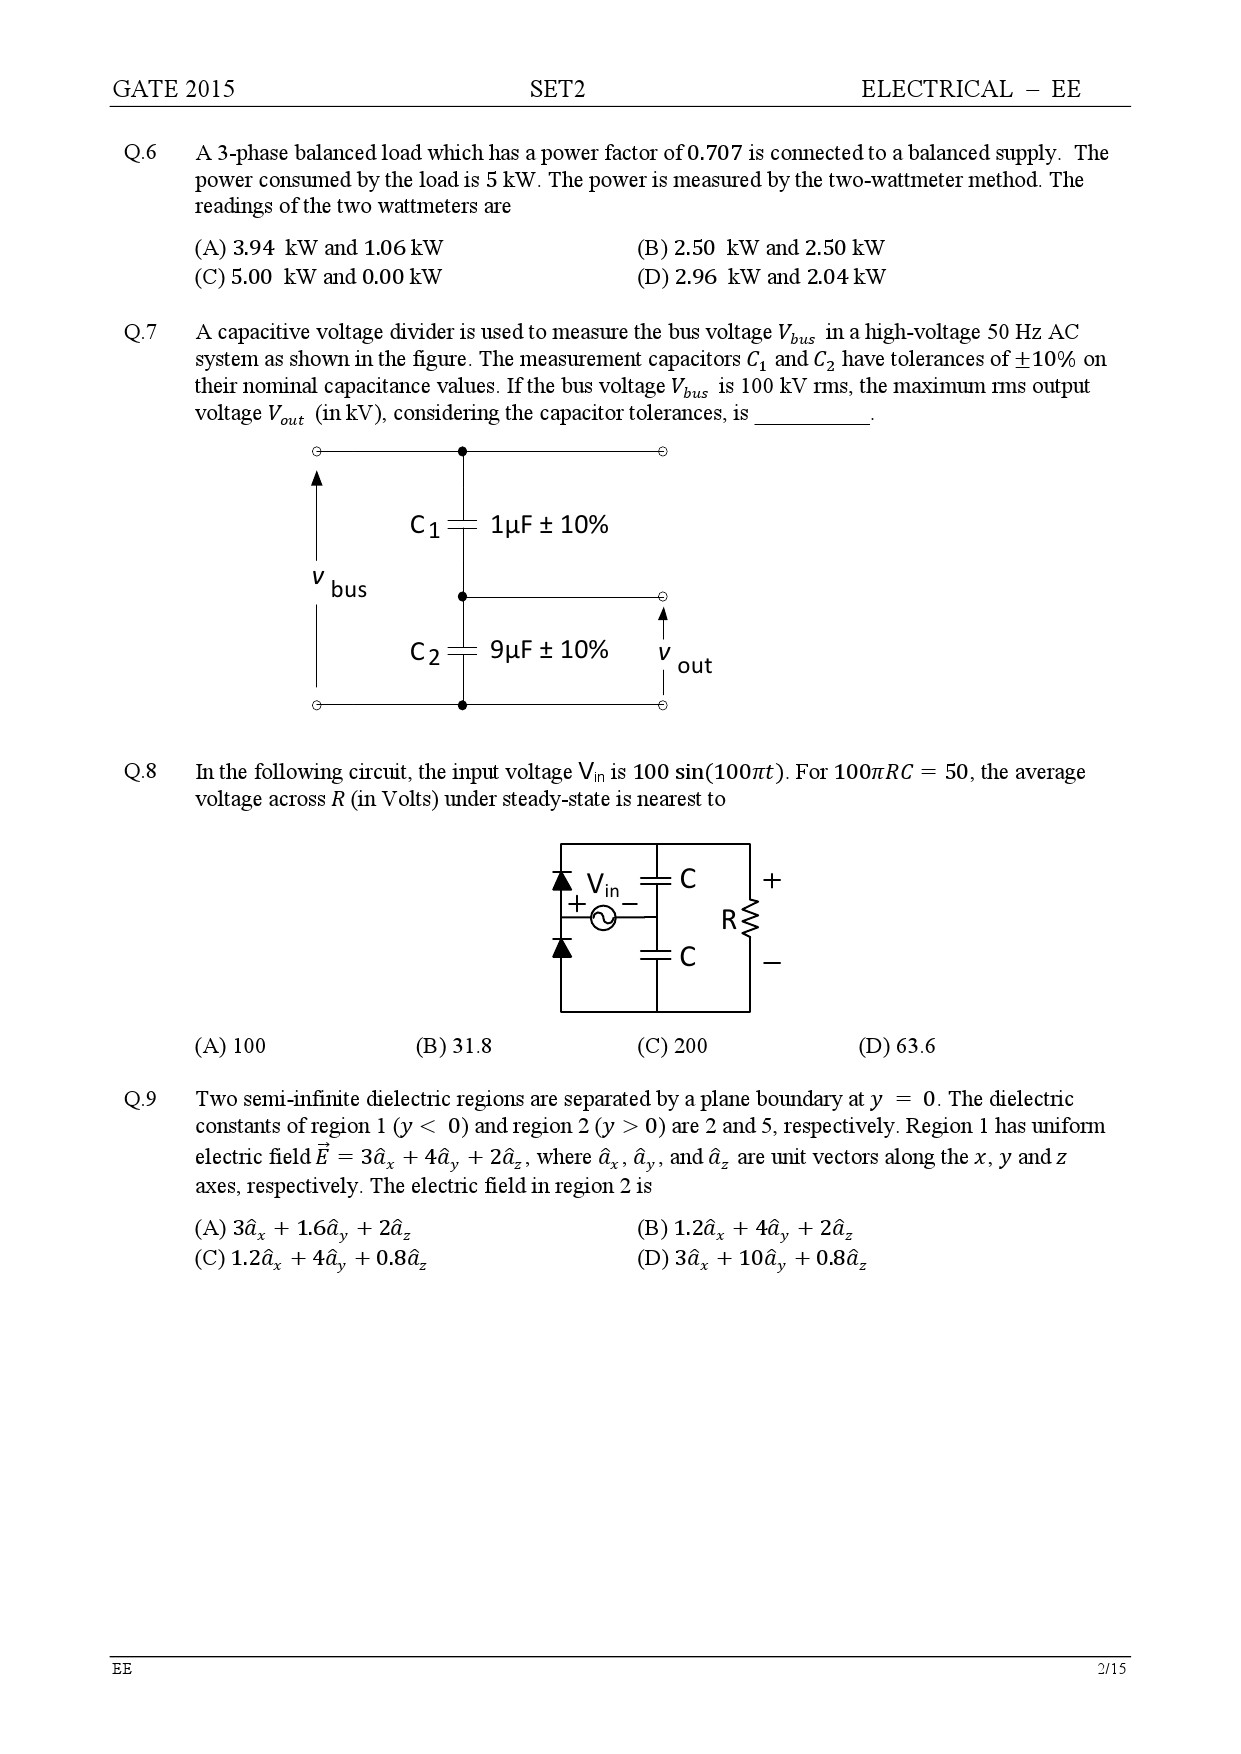 GATE Exam Question Paper 2015 Electrical Engineering Set 2 2